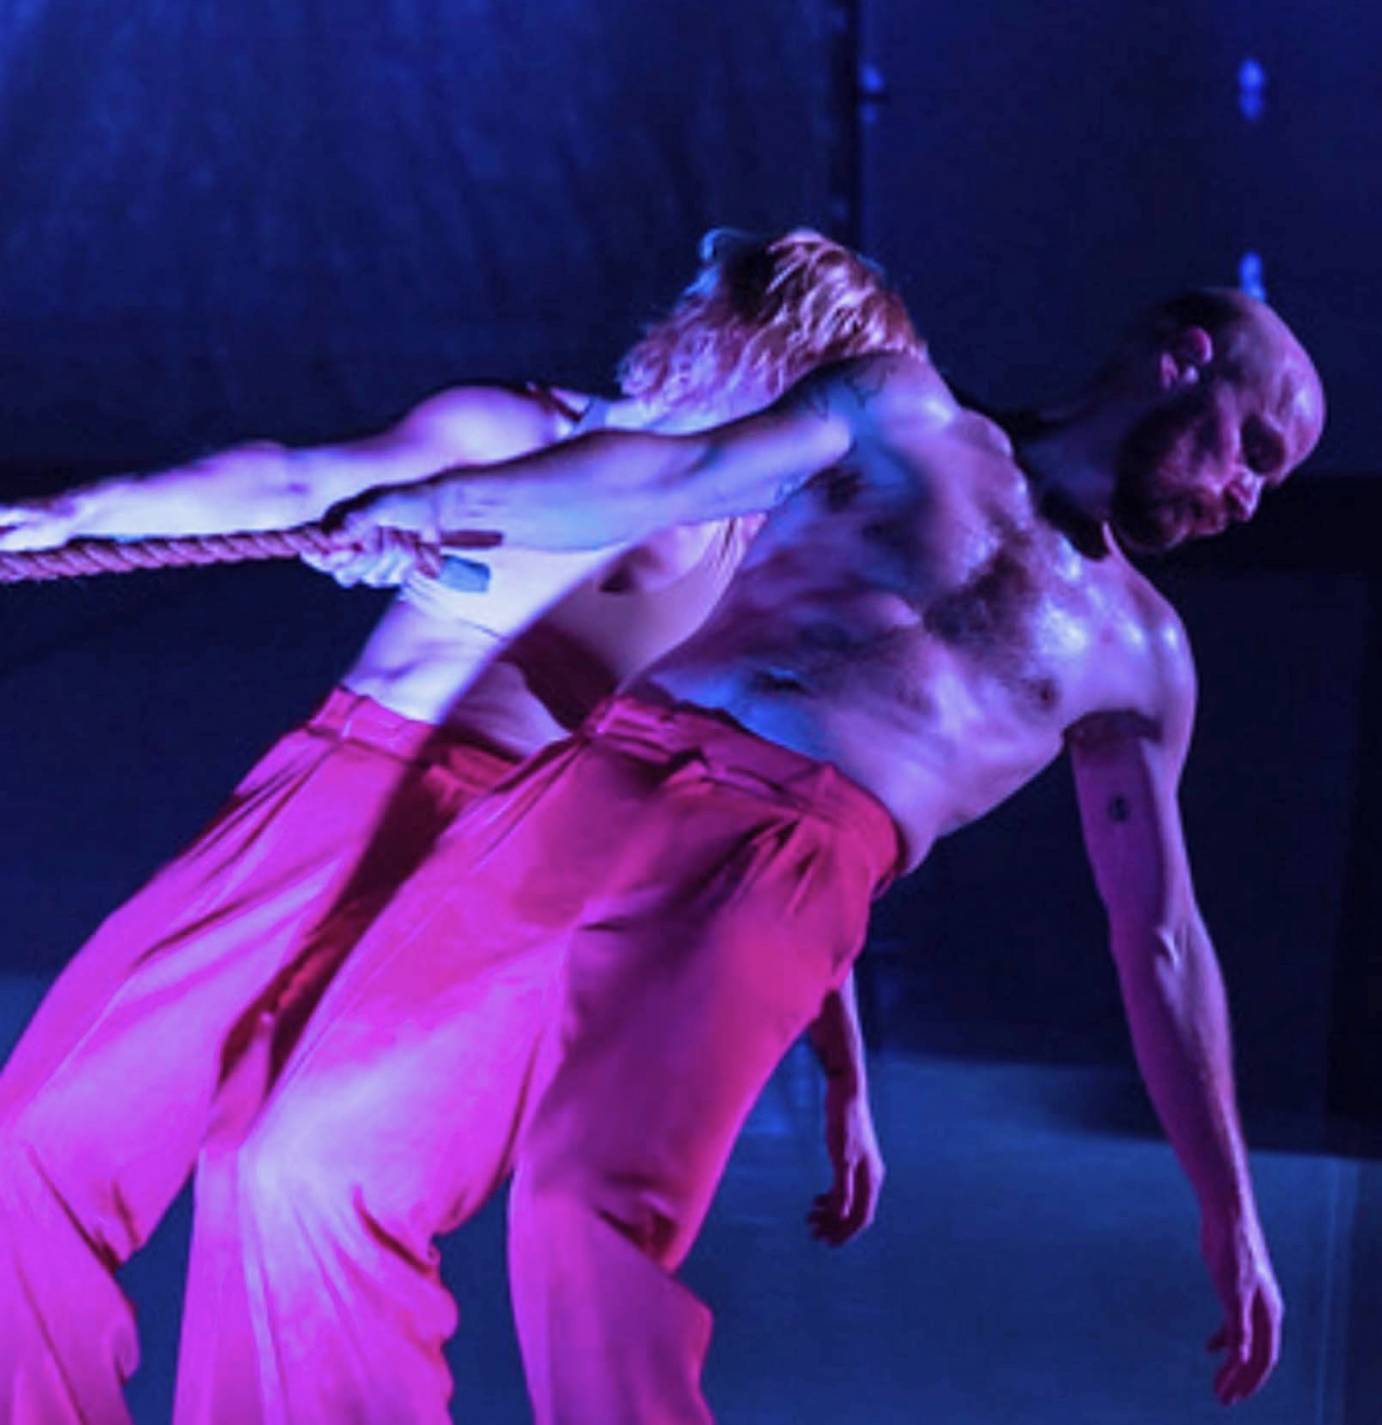 A male performer, chest bare, wearing long pants is compressed with his partner, her body behind his. Both are wearing bright pink long pants. They are leaning to their right grasping a rope. The color of the photo is purplish.